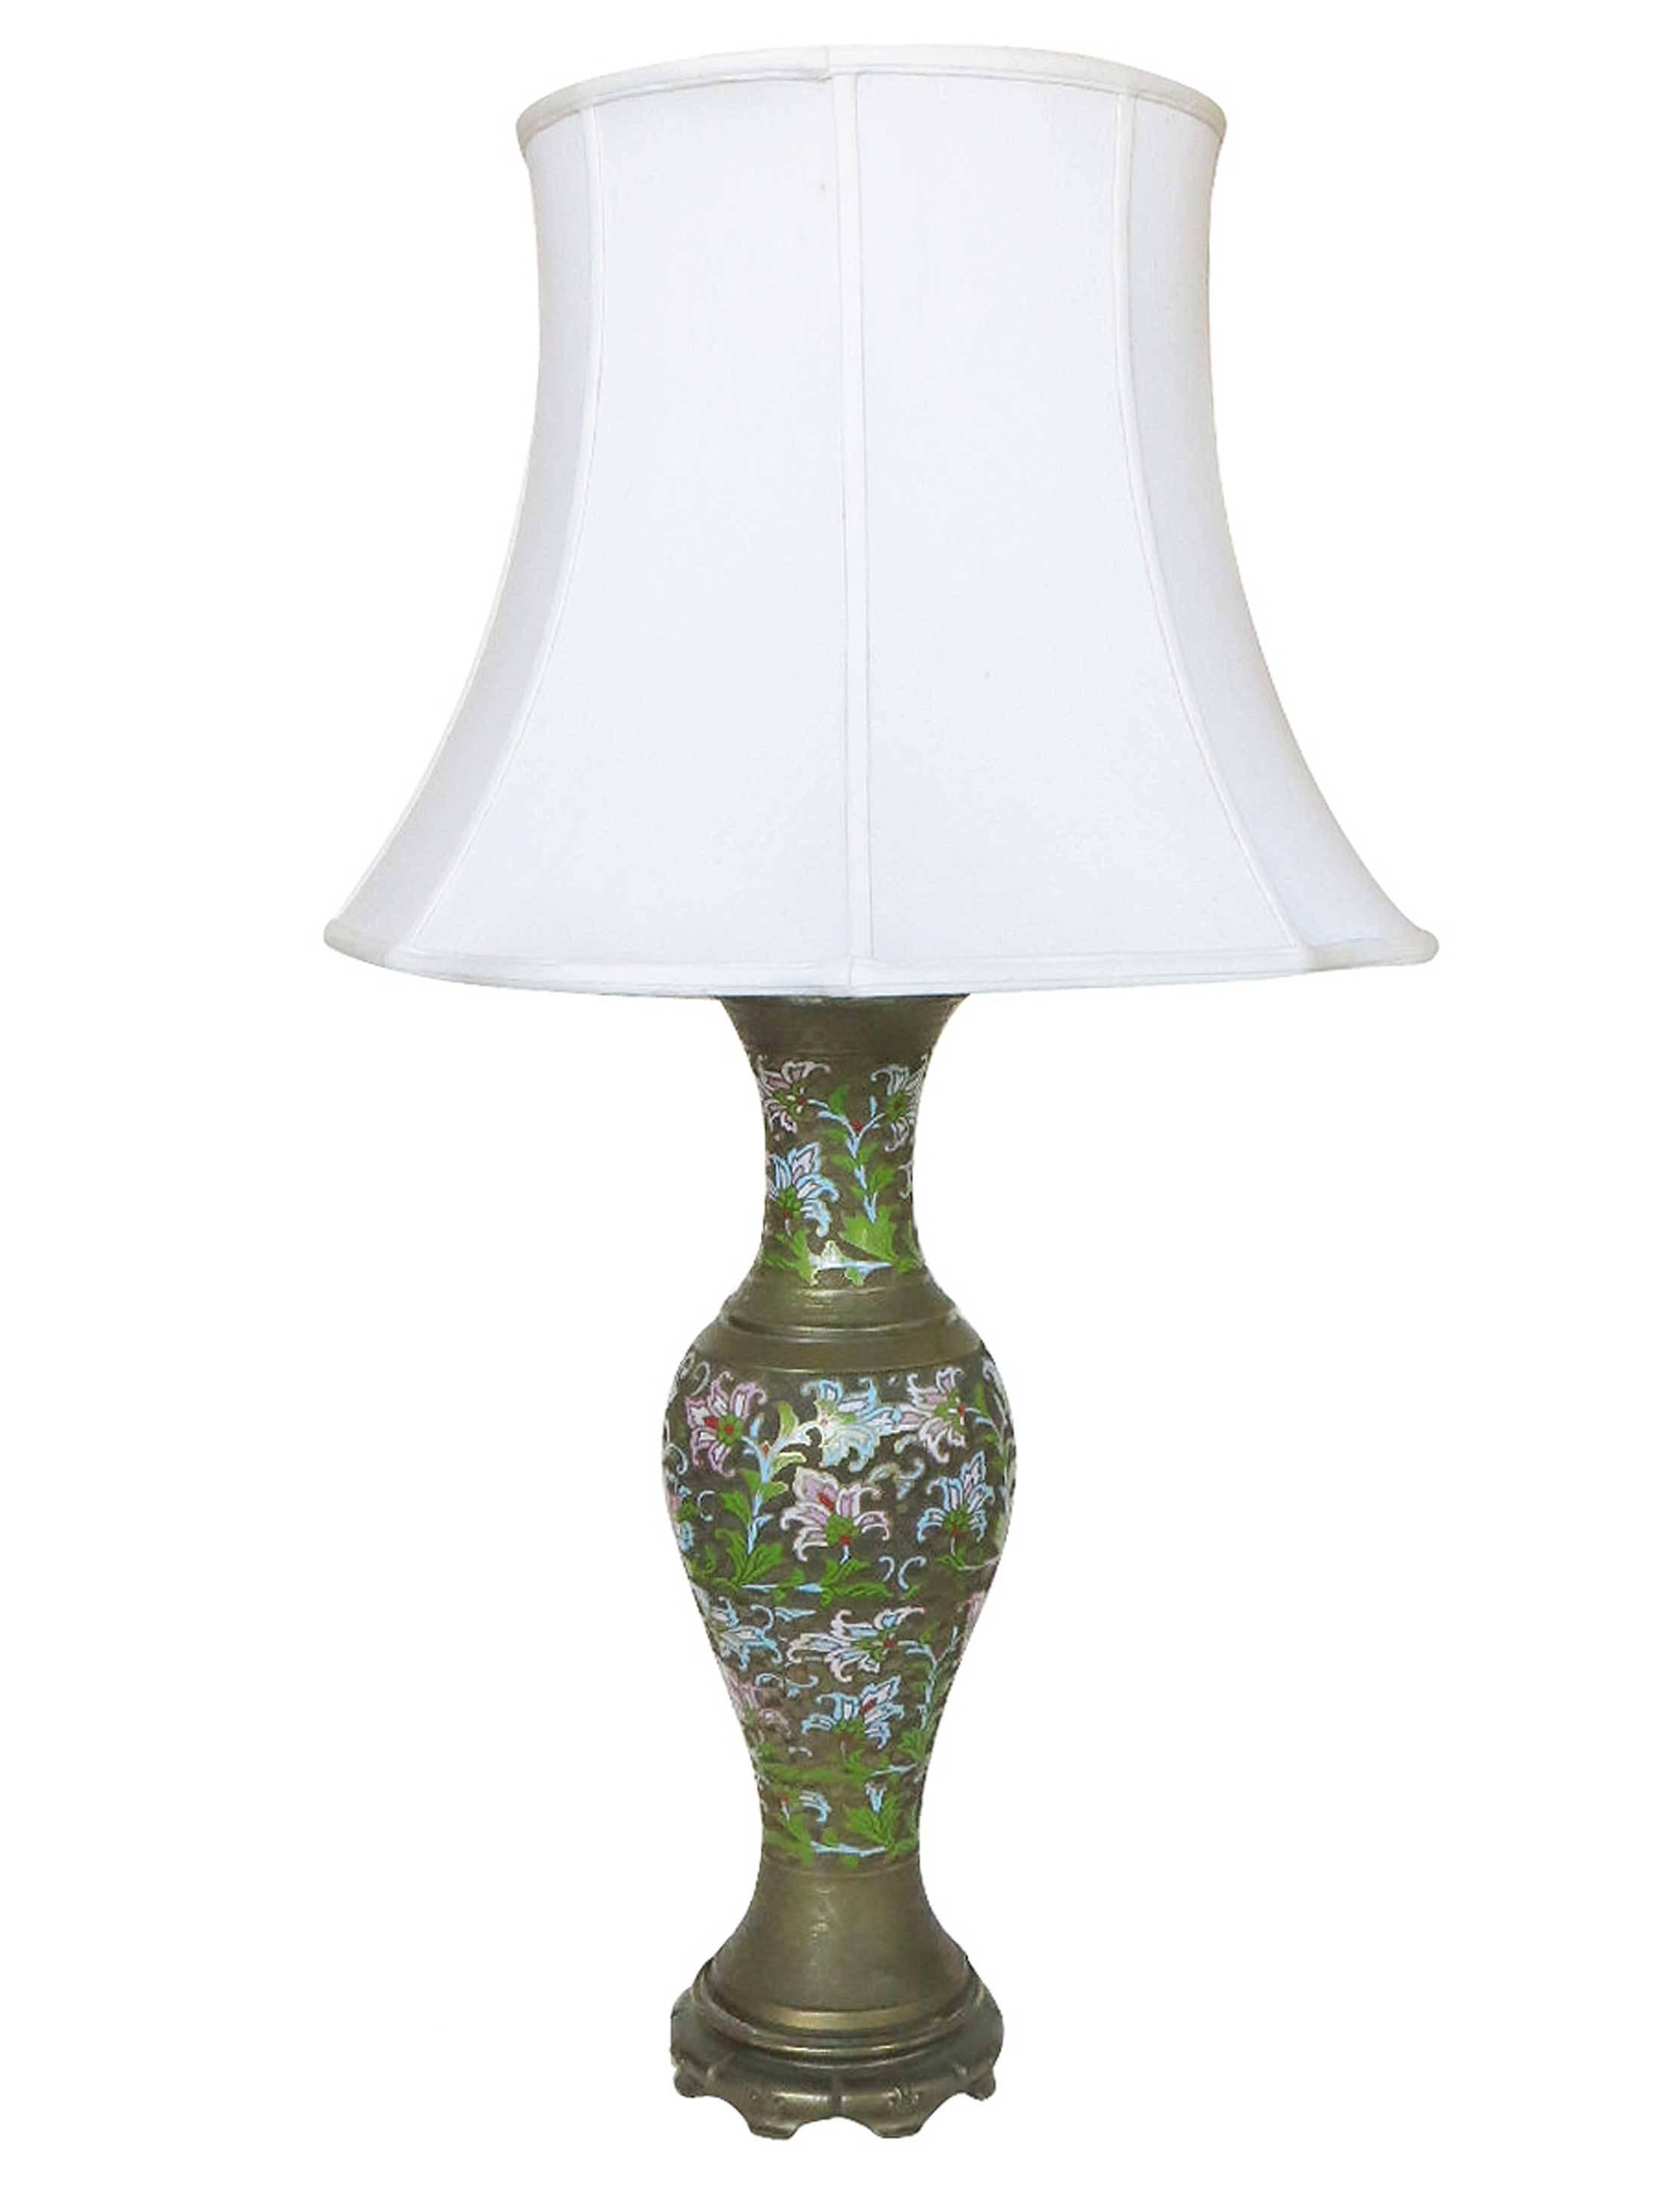 Pair of Chinese Cloisonne Champlevé brass lamps with multicolored enamel floral along the outside and white lamp shades.

Circa 1950

Champlevé is an enameling technique in the decorative arts or an object made by that process, in which